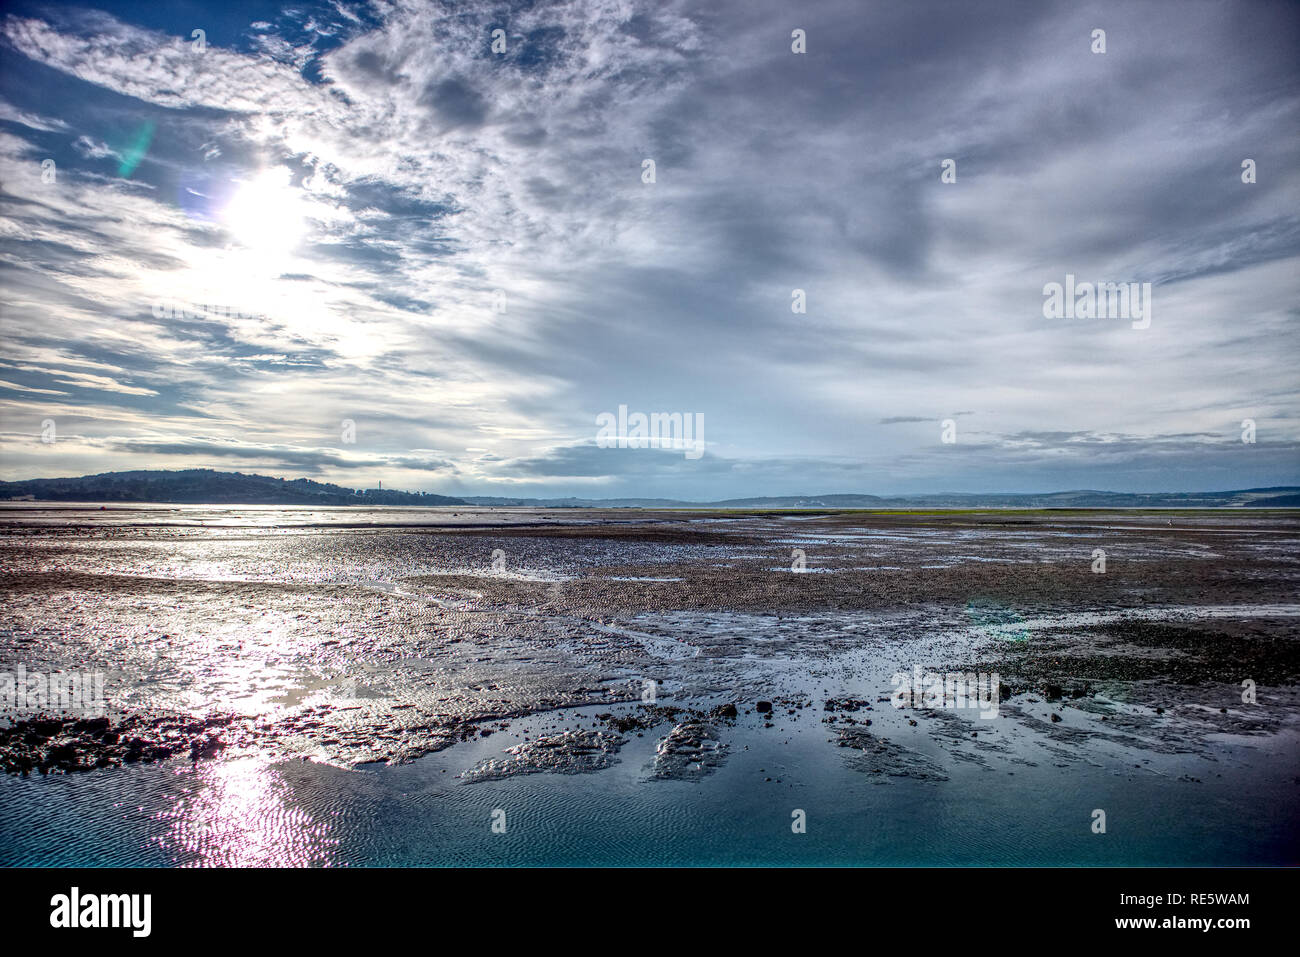 A beautiful shot of the Firth of Forth river at low tide taken from Cramond Island, close to Edinburgh in Scotland, United Kingdom. Stock Photo